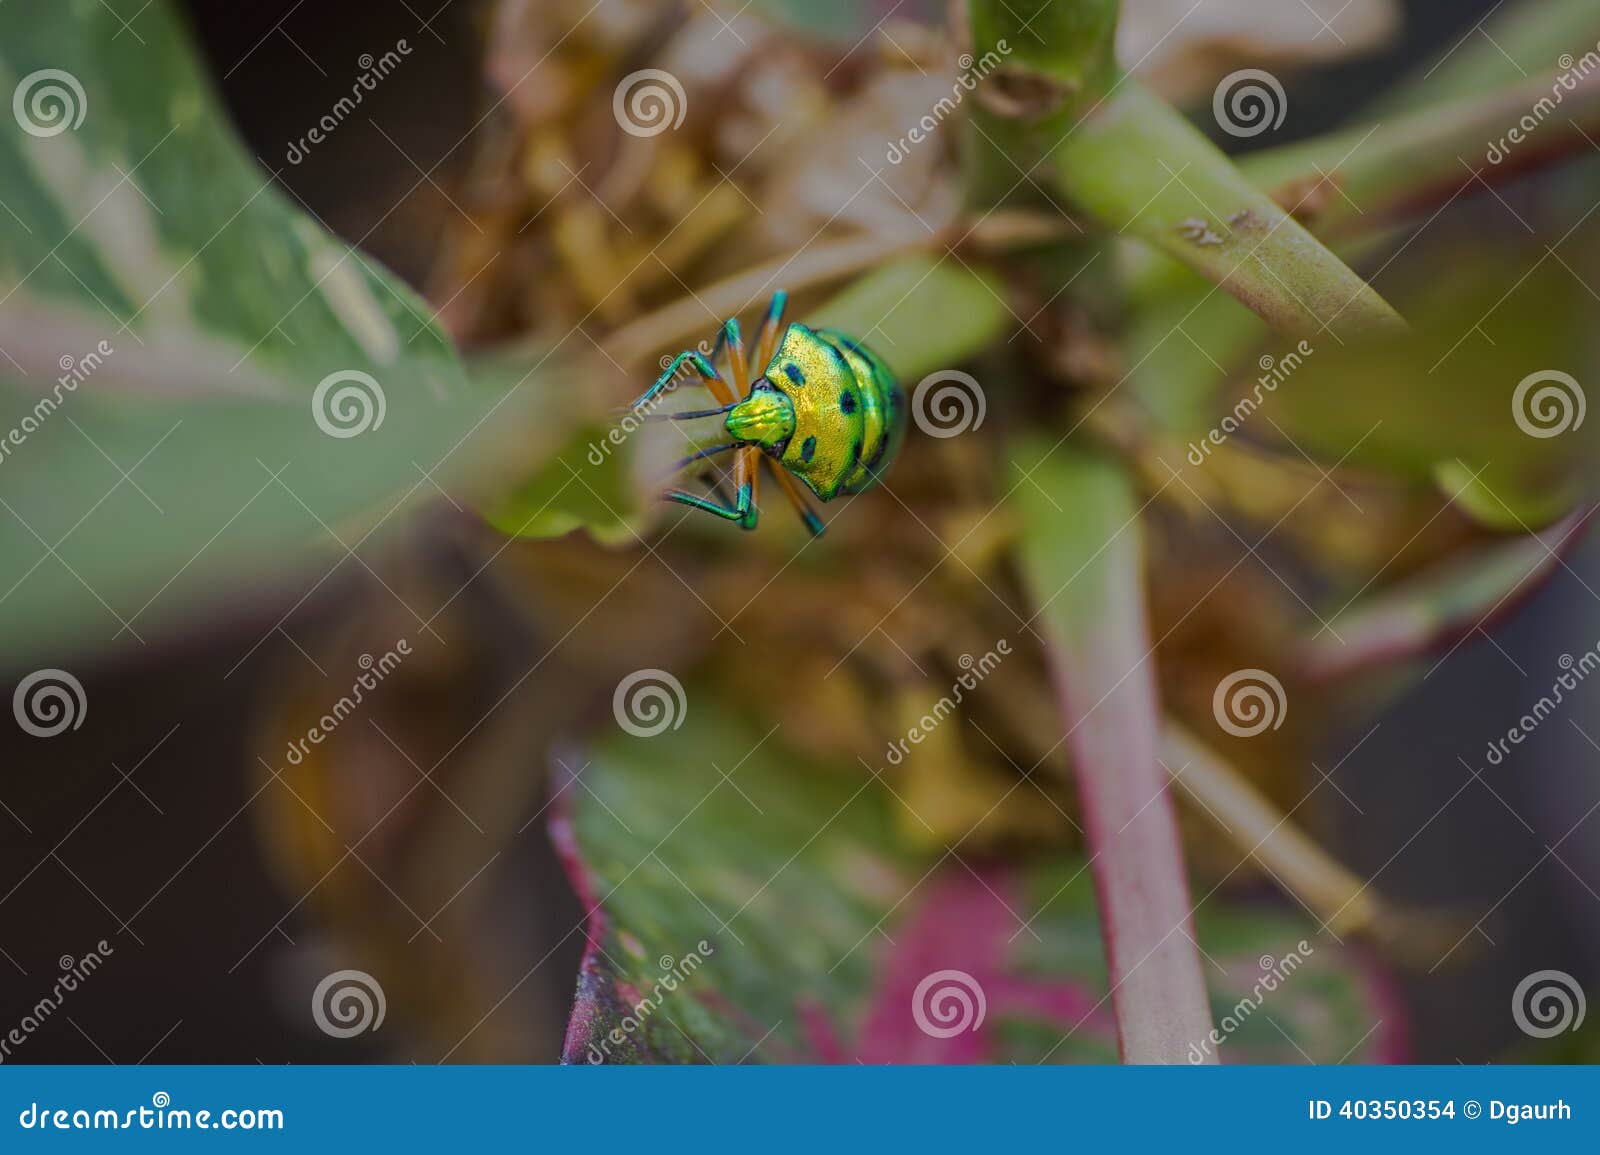 A fluorescent green beetle ( which flew to this place). Walks up the branch of a small plant. Shallow DOF.